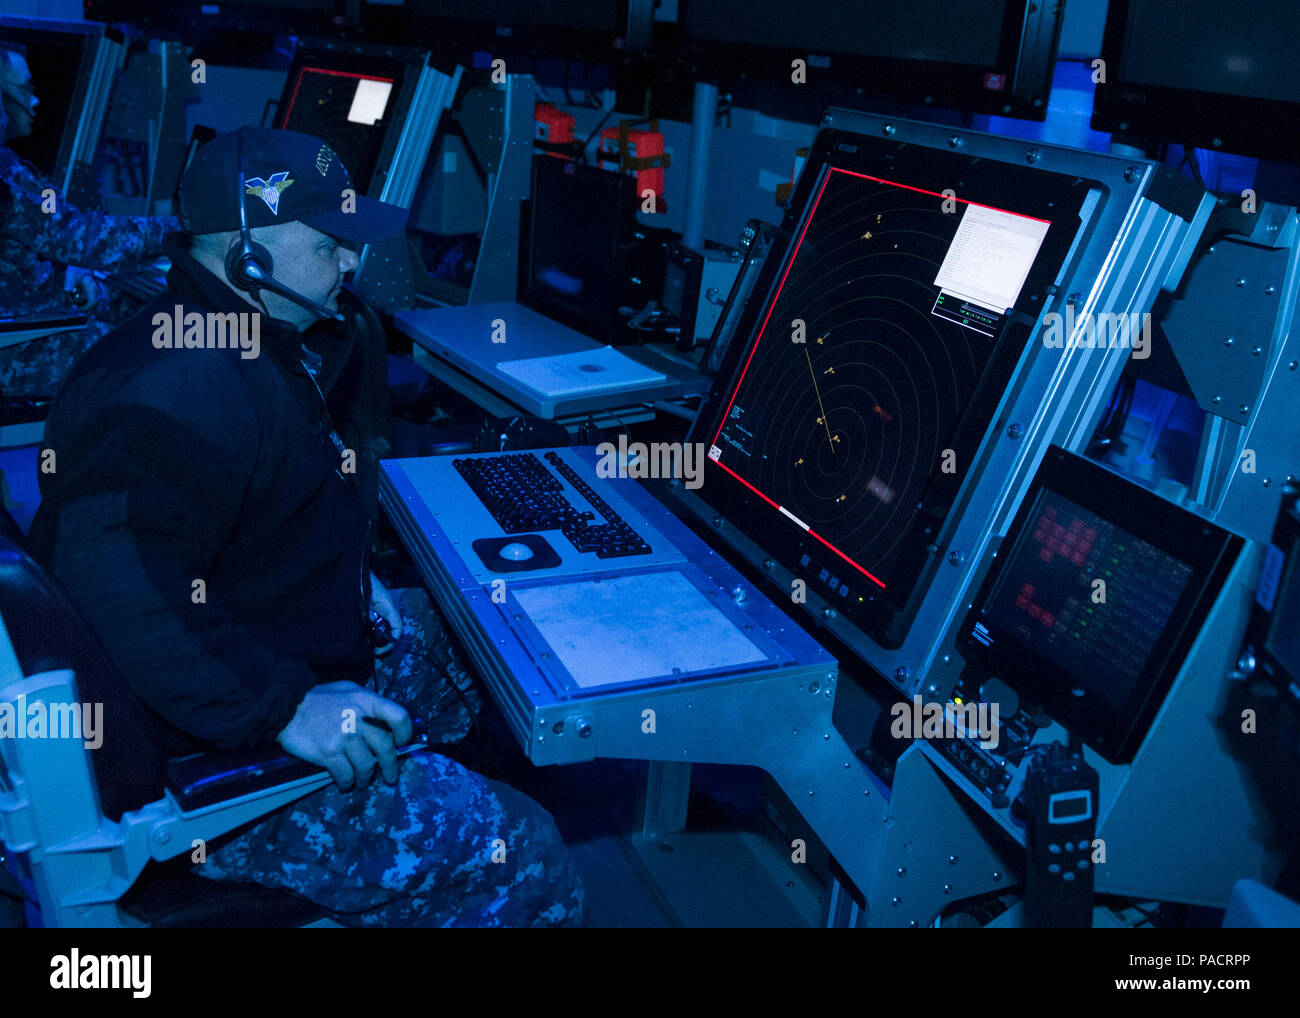 160322-N-DI878-097 (March 22, 2016) SAN DIEGO – USS Carl Vinson (CVN 70) Chief Air Traffic Controller Keith Thompson demonstrates the first air traffic control simulator installed on board a Navy aircraft carrier in the aircraft carrier USS Carl Vinson air traffic control center (CATCC). Carl Vinson is currently pierside in its homeport of San Diego. (U.S. Navy photo by Mass Communication Specialist 3rd Class Giovanni Squadrito/Released) Stock Photo